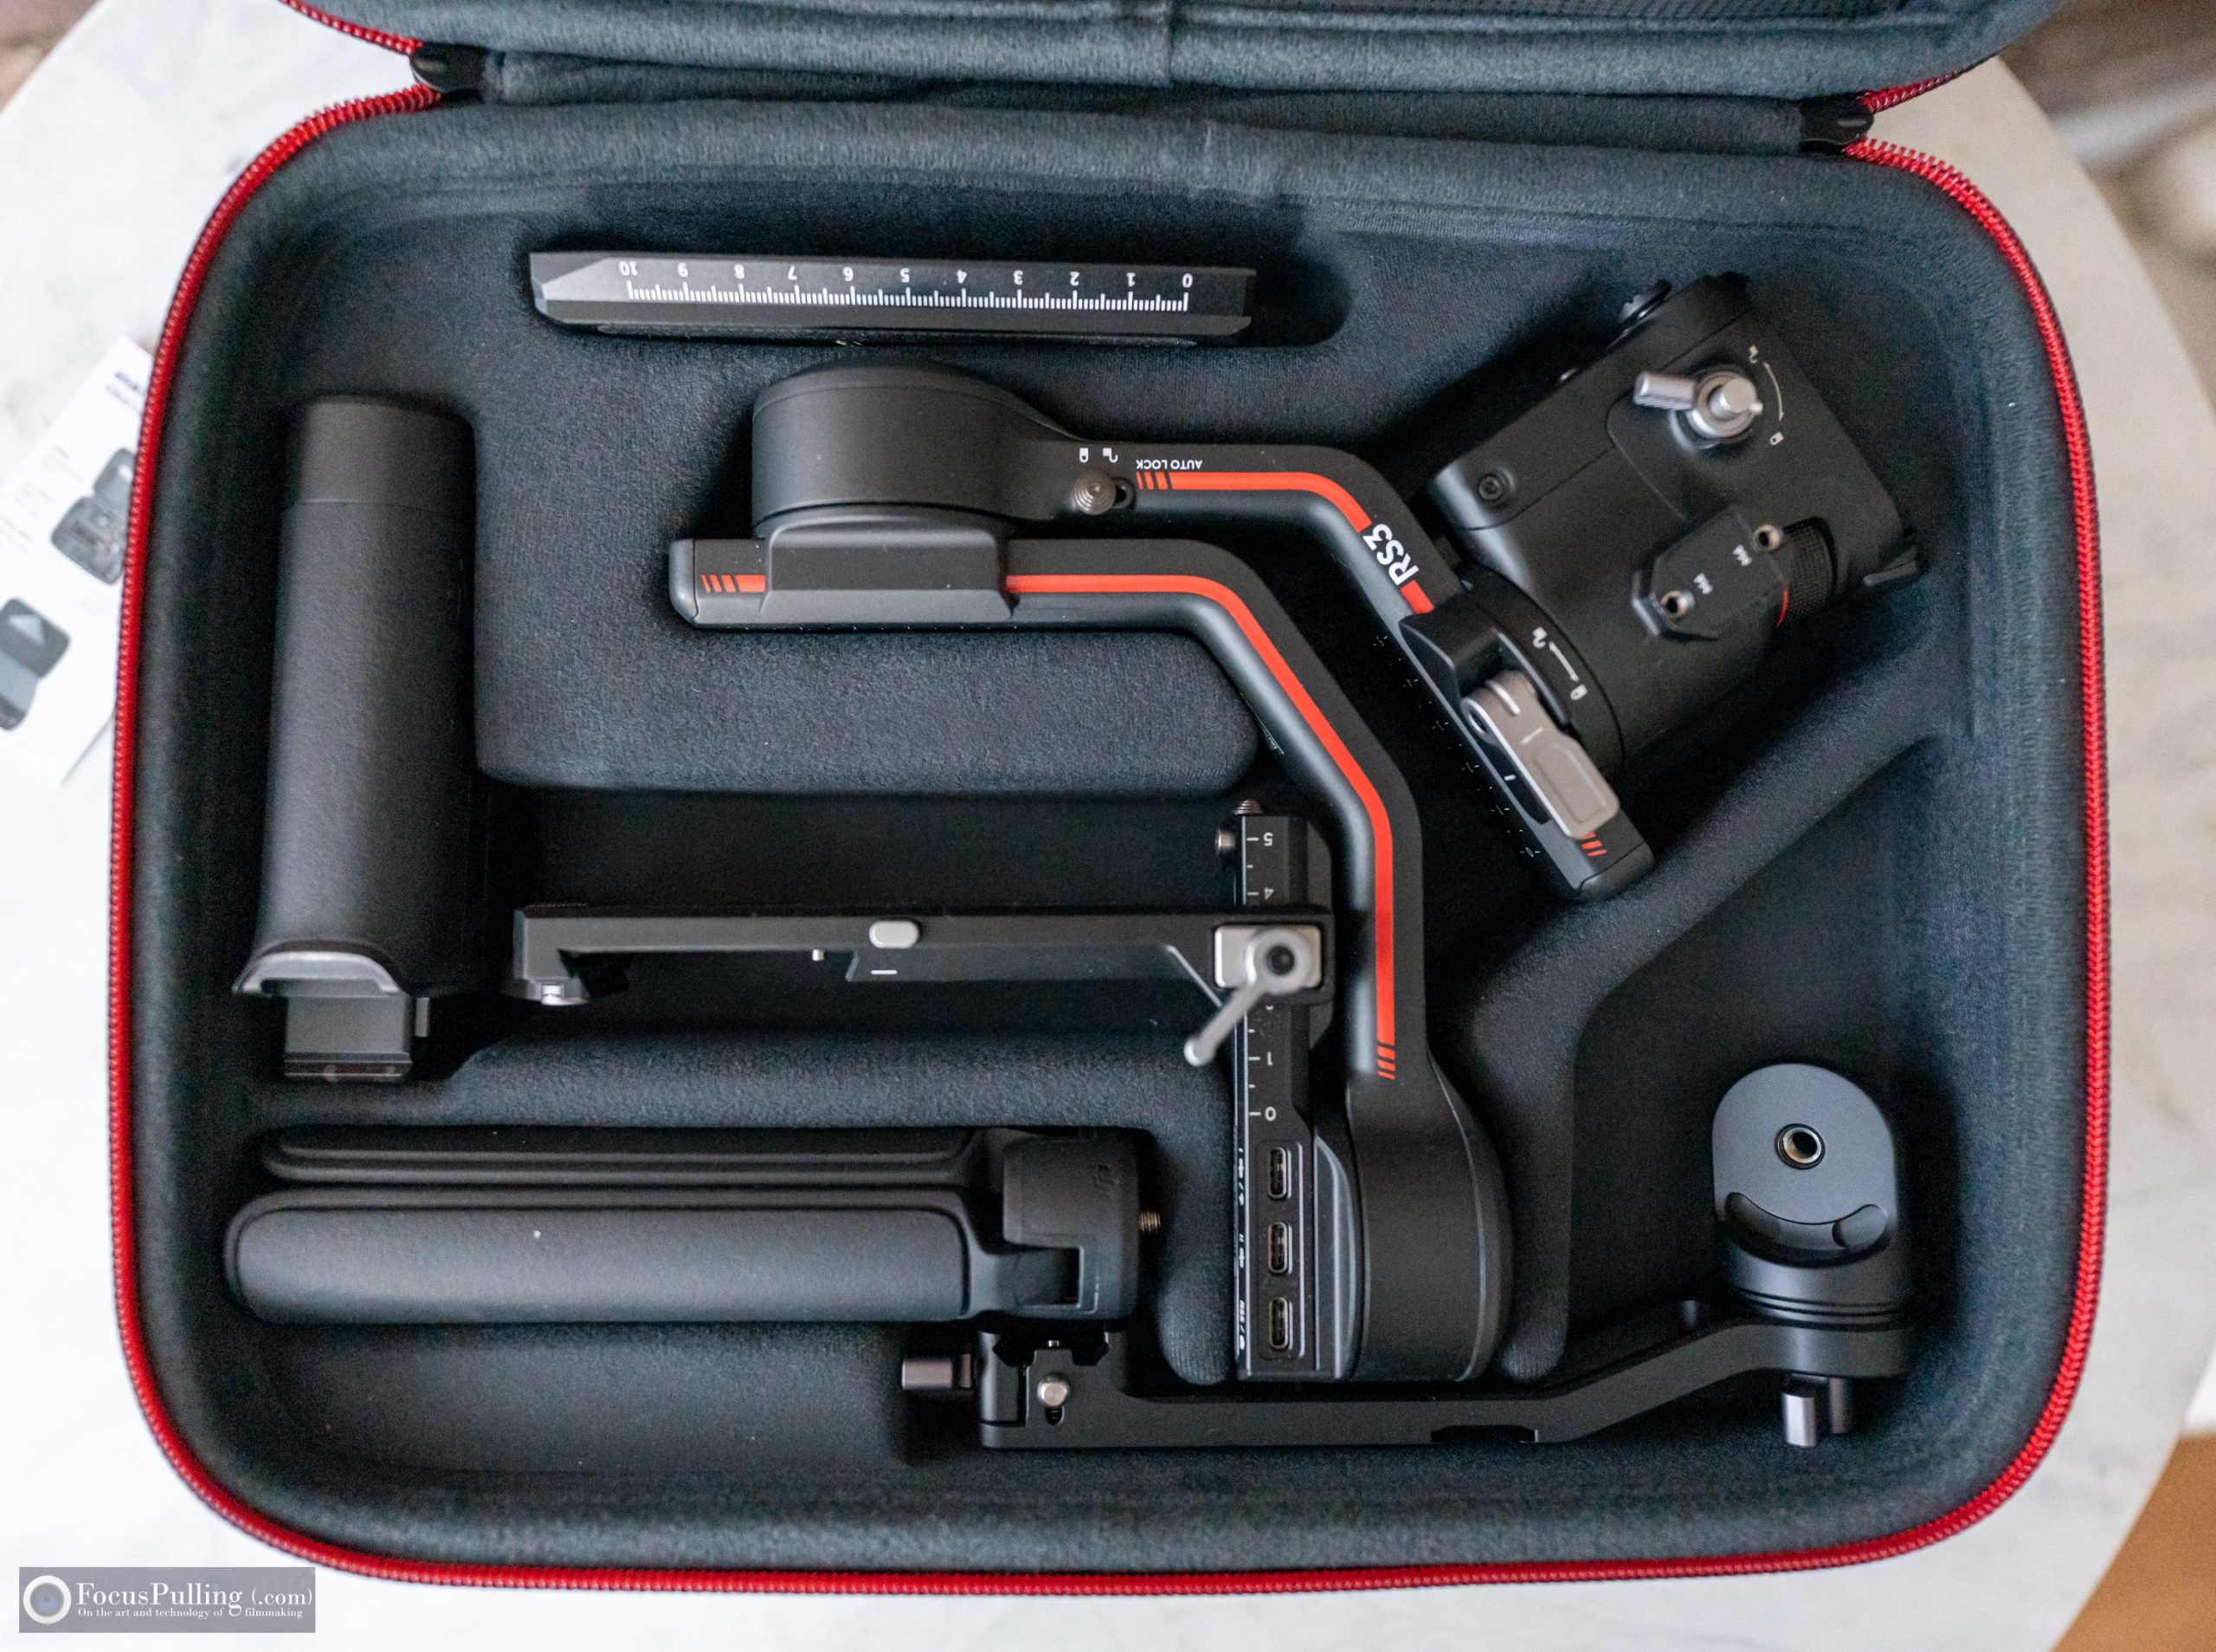 3: the gimbal RS all-around best for stabilizer - Essential accessories FocusPulling DJI